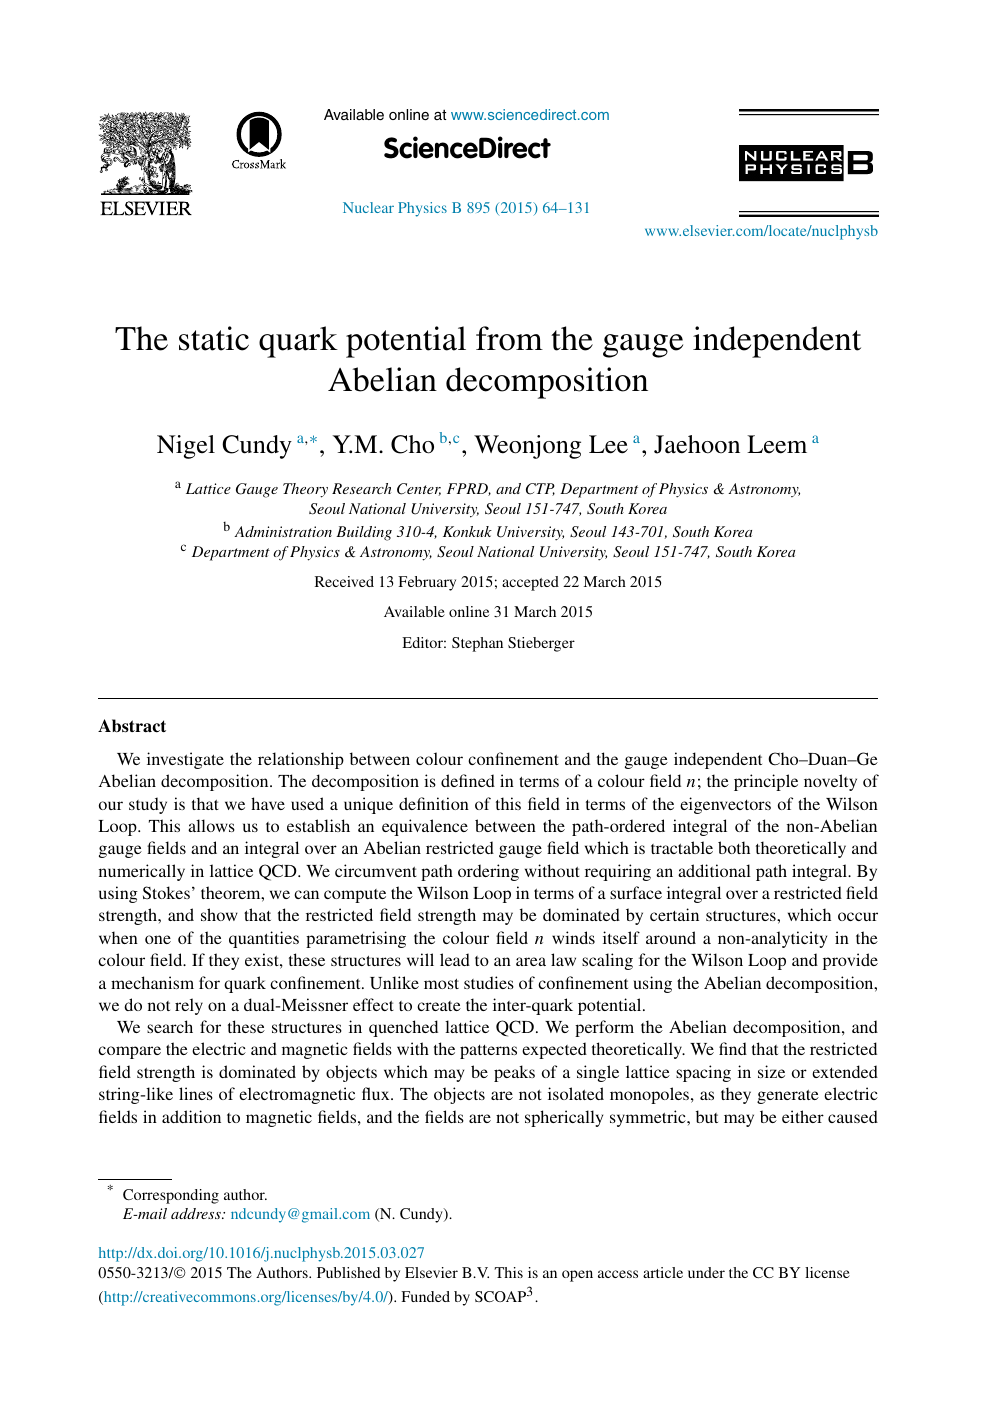 The Static Quark Potential From The Gauge Independent Abelian Decomposition Topic Of Research Paper In Physical Sciences Download Scholarly Article Pdf And Read For Free On Cyberleninka Open Science Hub